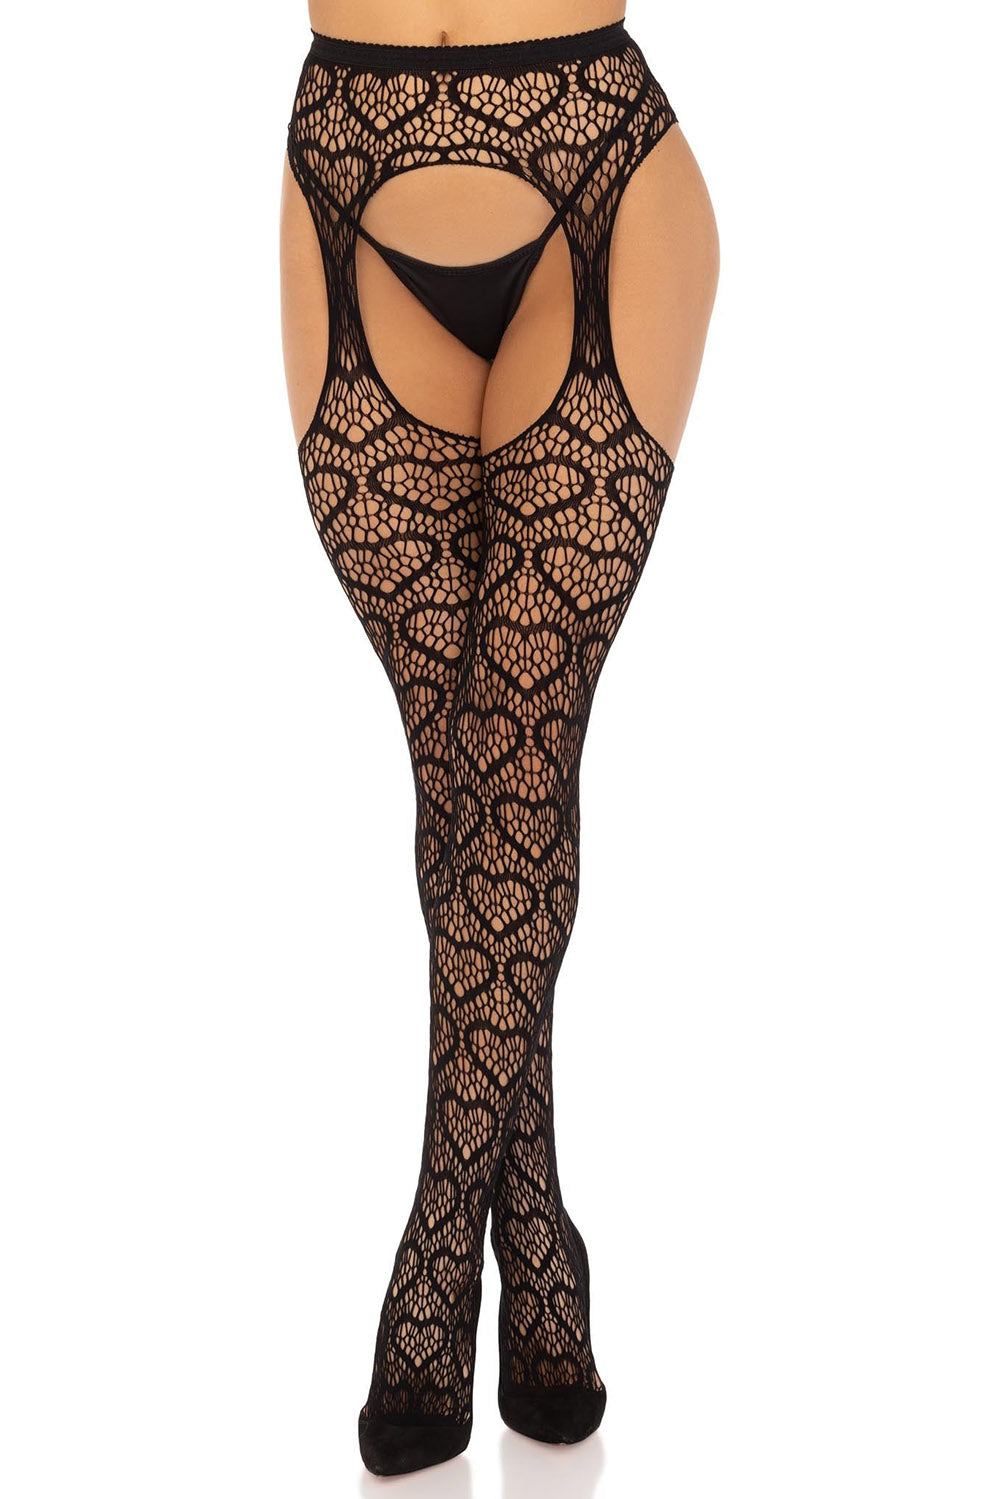 womens high waisted gothic stockings